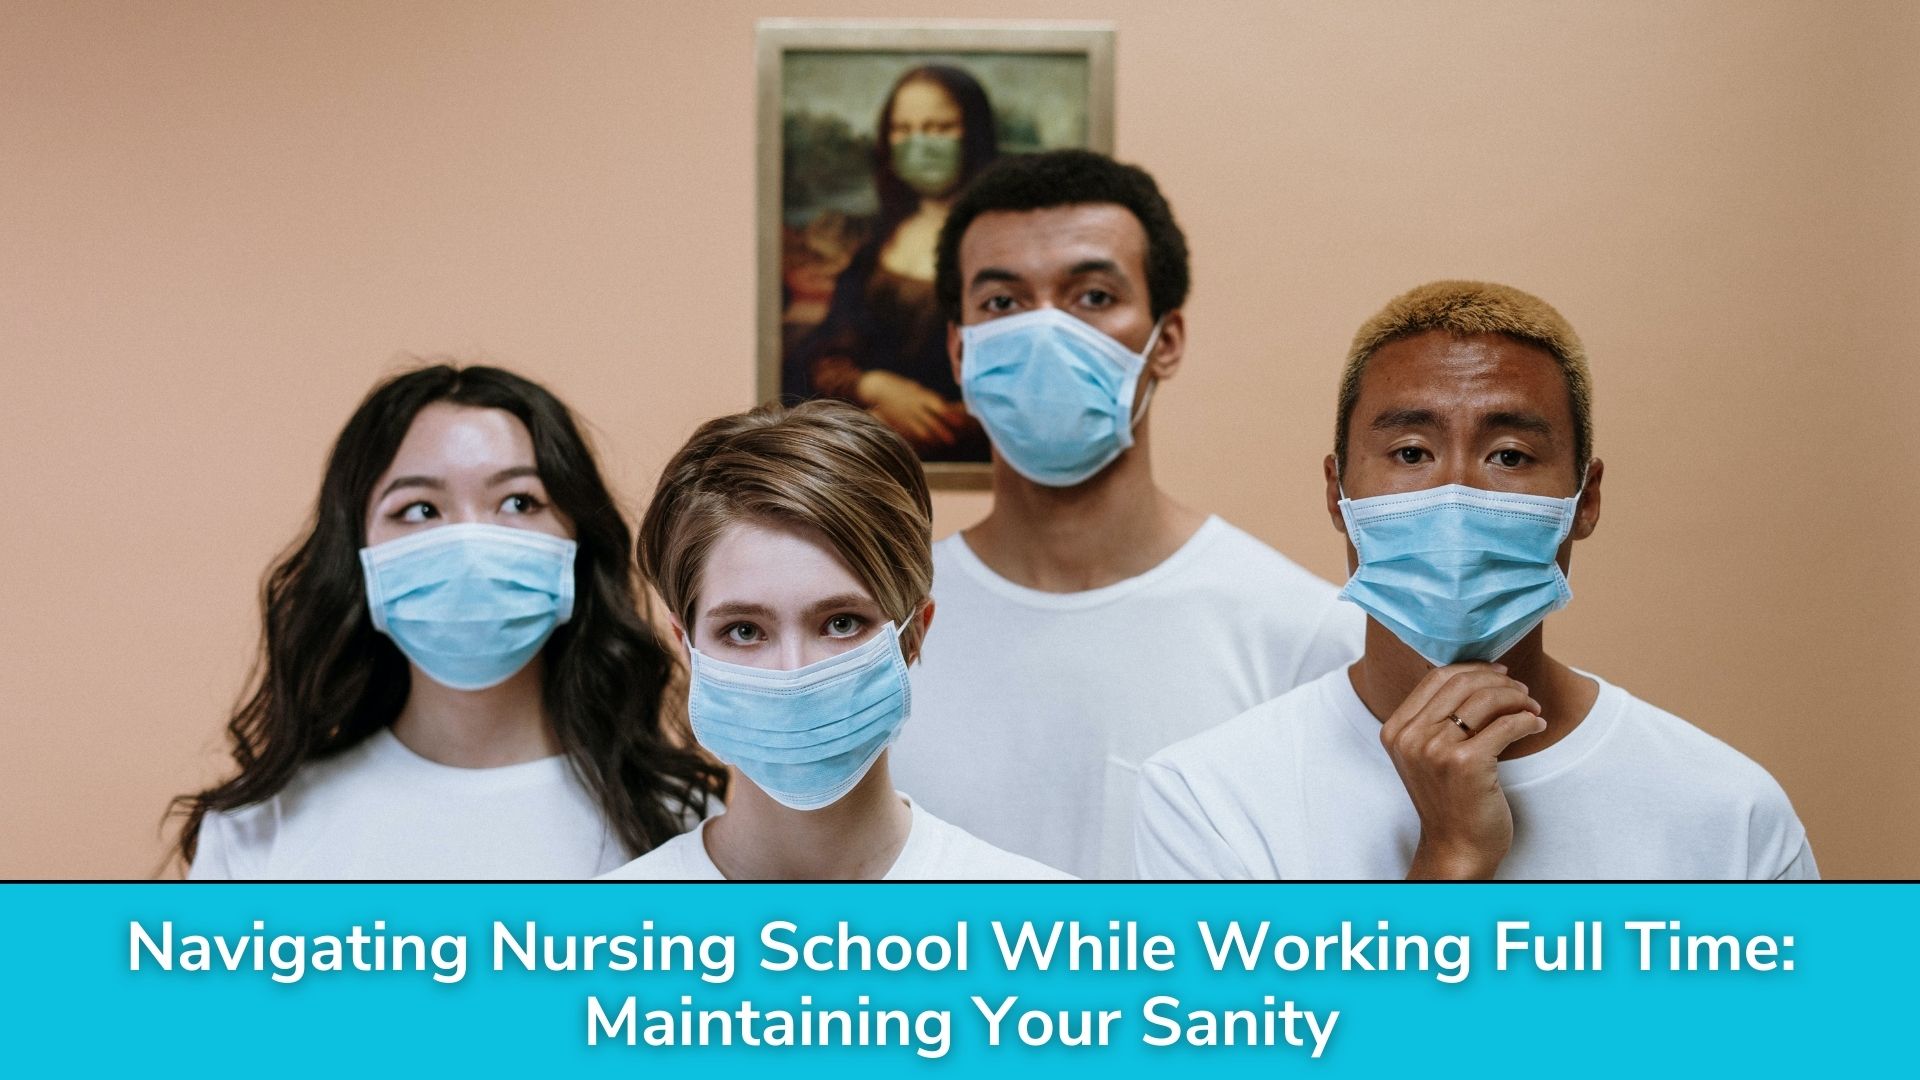 Navigating Nursing School While Working Full Time: Maintaining Your Sanity